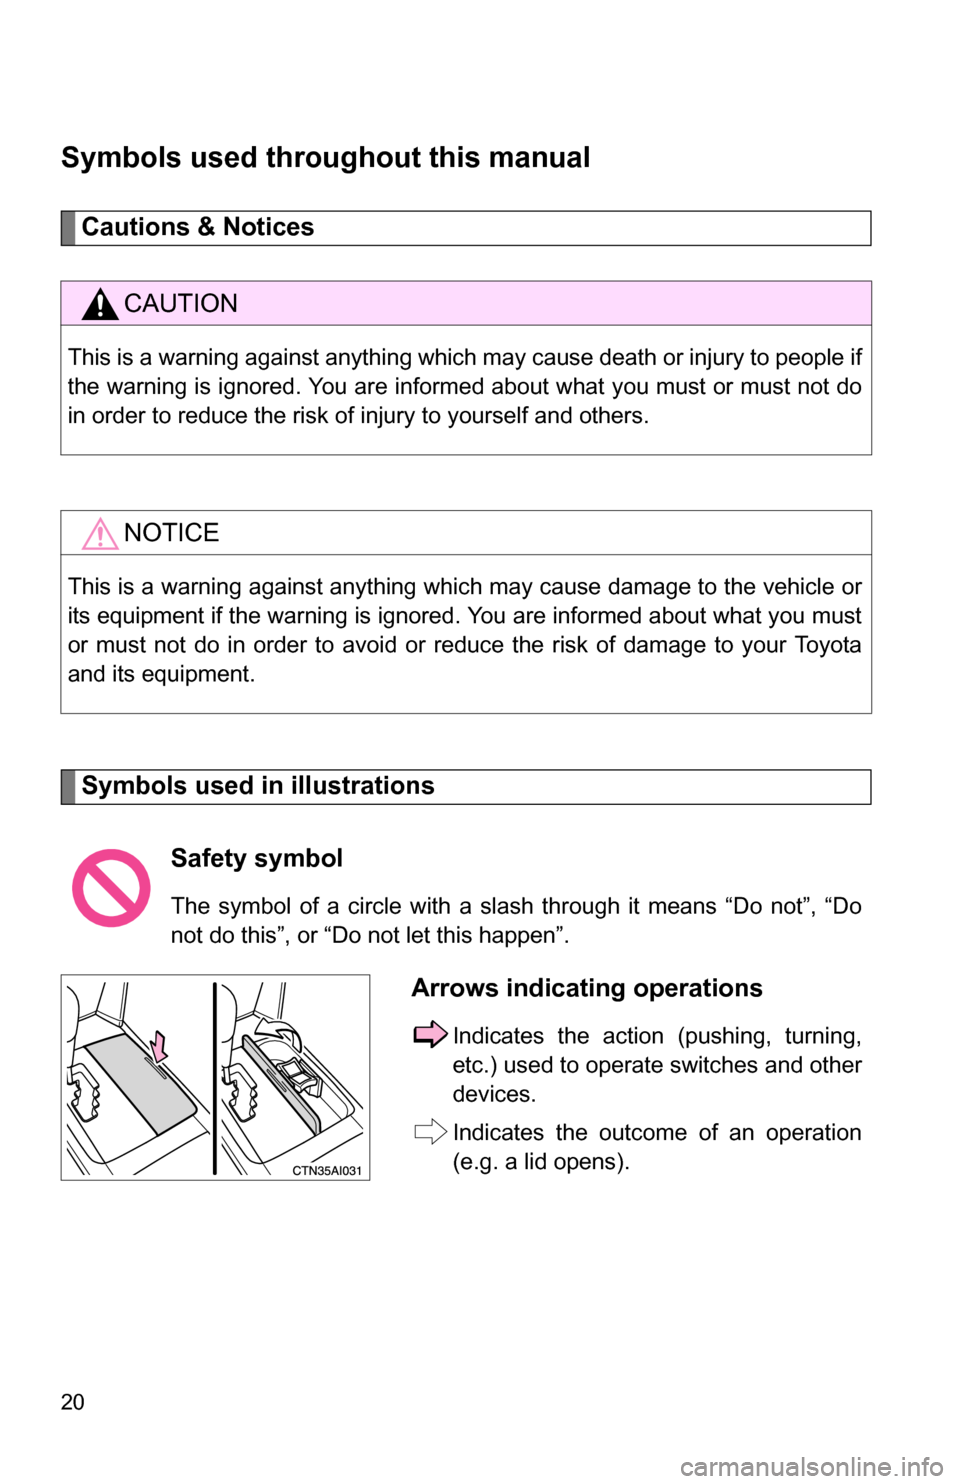 TOYOTA CAMRY HYBRID 2010 XV40 / 8.G User Guide 20
Symbols used throughout this manual
Cautions & Notices 
Symbols used in illustrations
CAUTION
This is a warning against anything which may cause death or injury to people if
the warning is ignored.